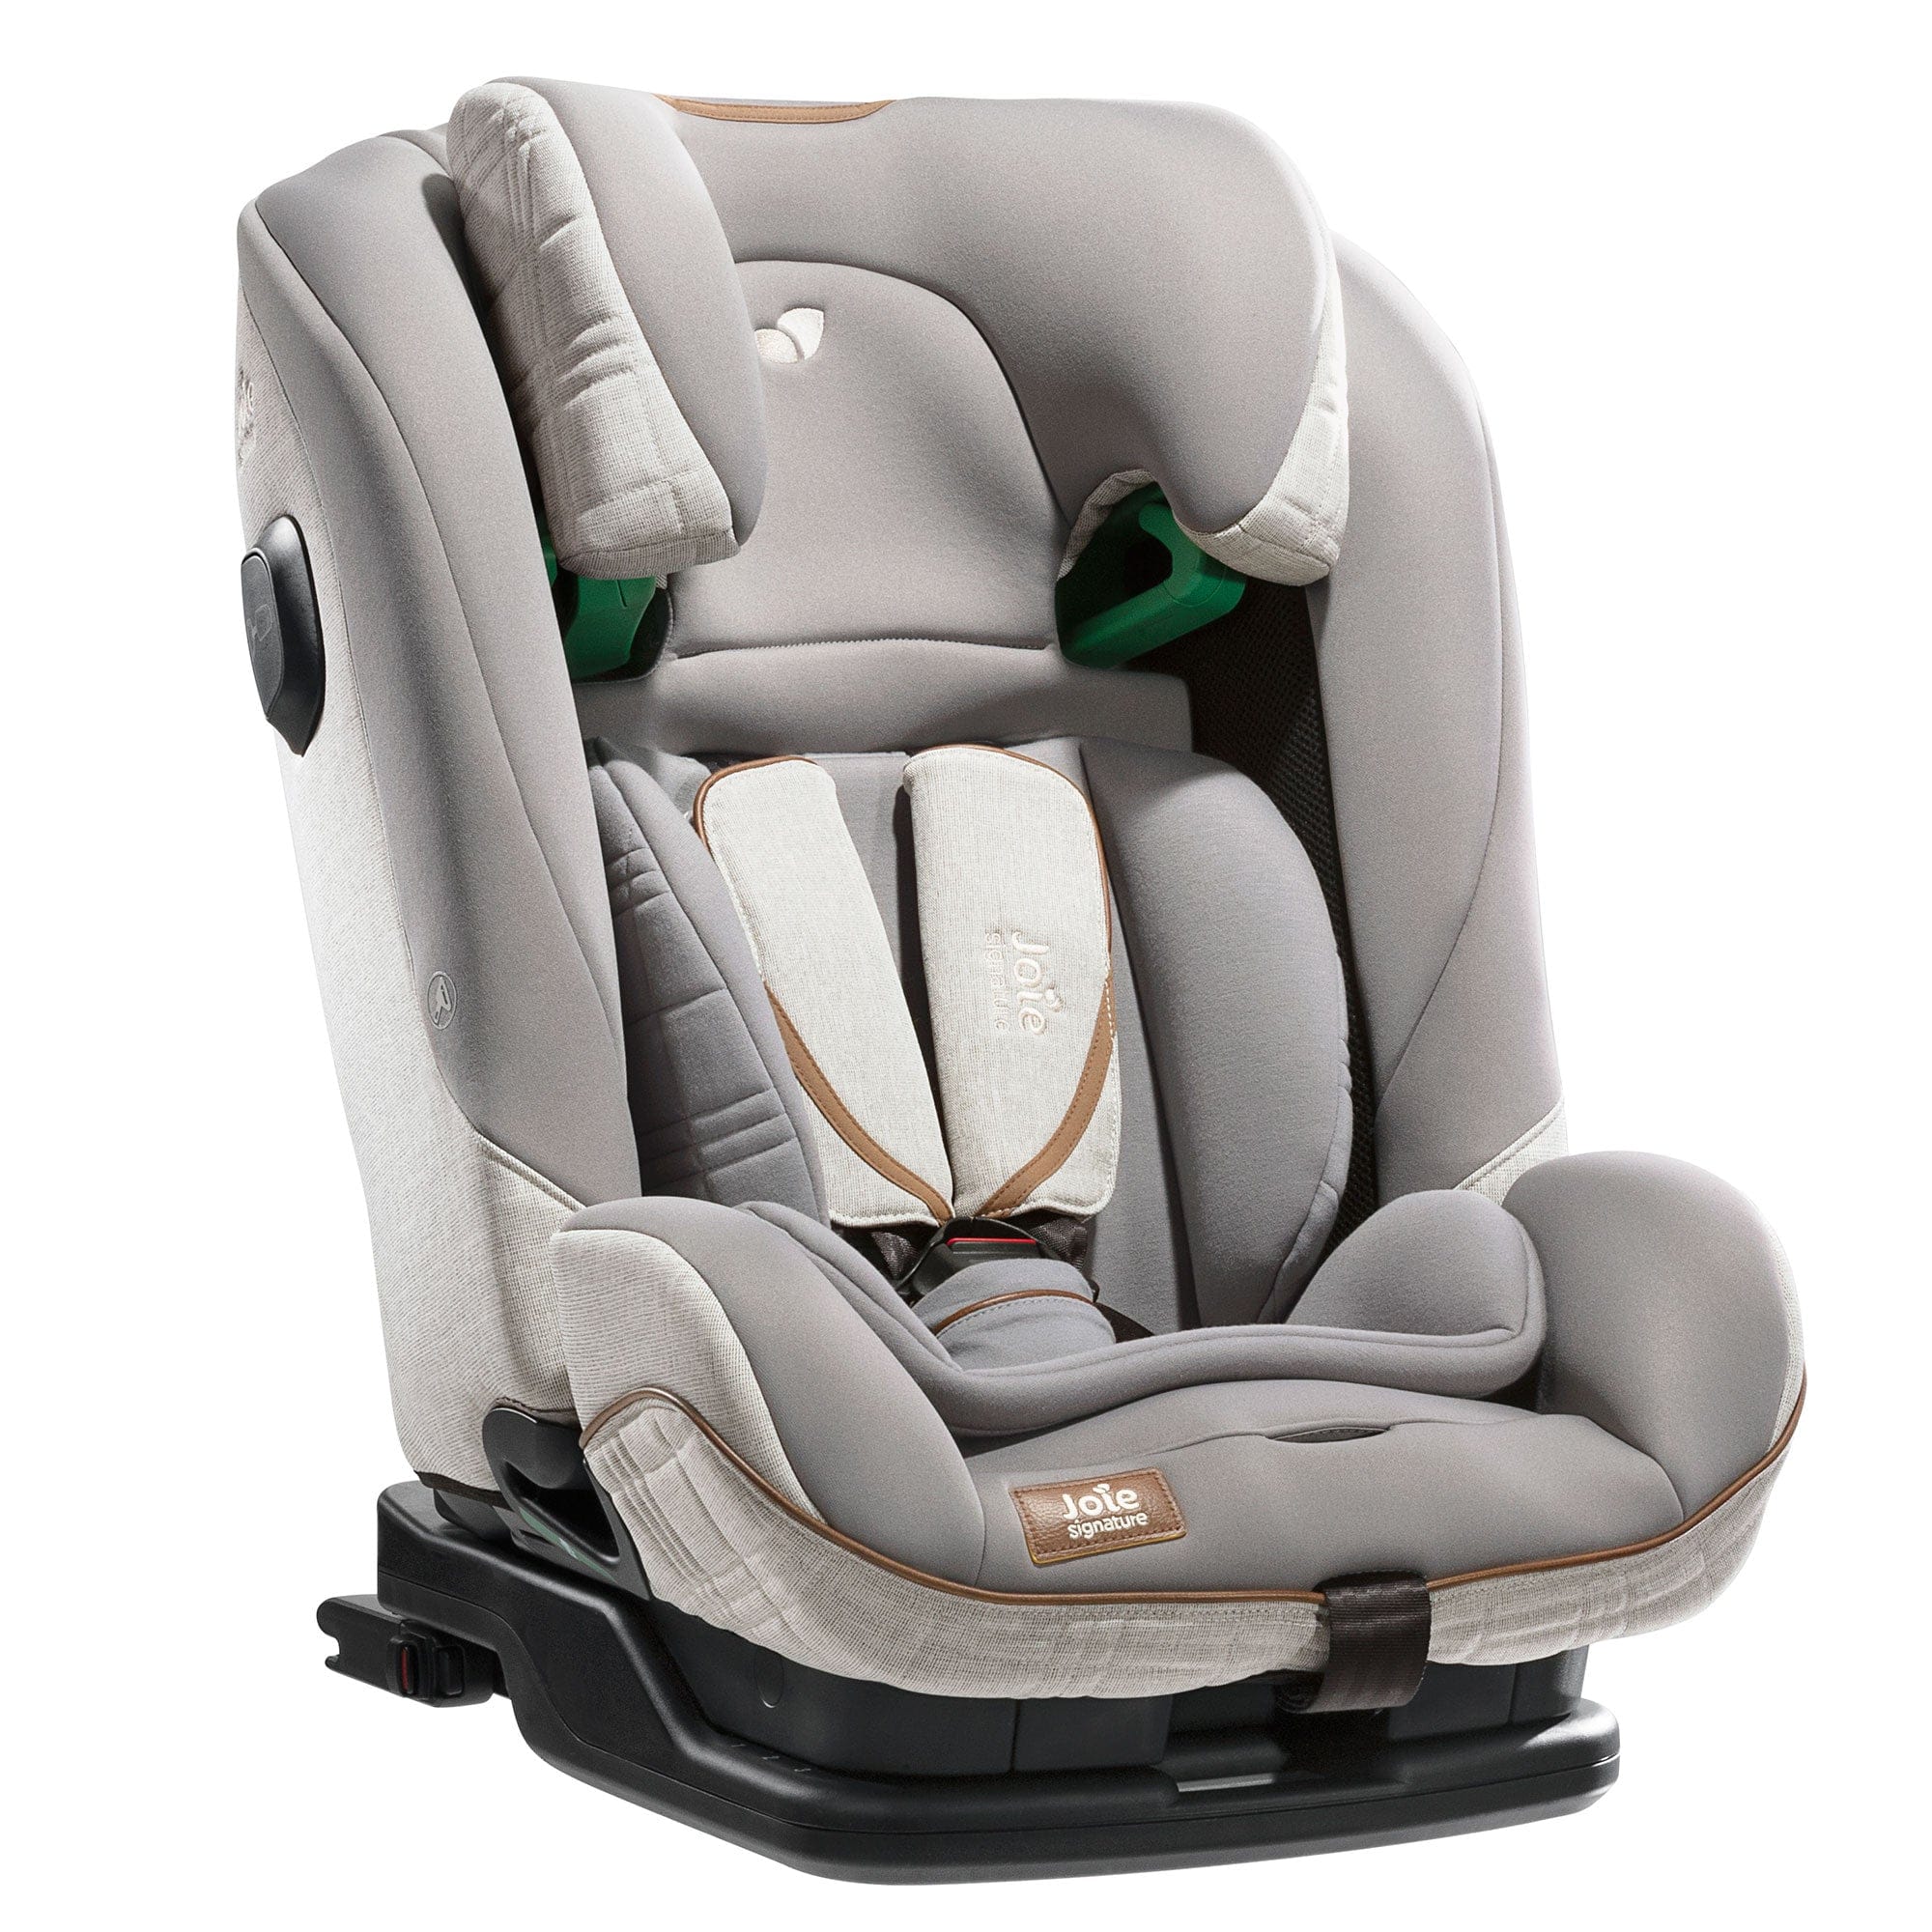 Copy of Joie i-Plenti Signature Car Seat in Oyster Toddler Car Seats